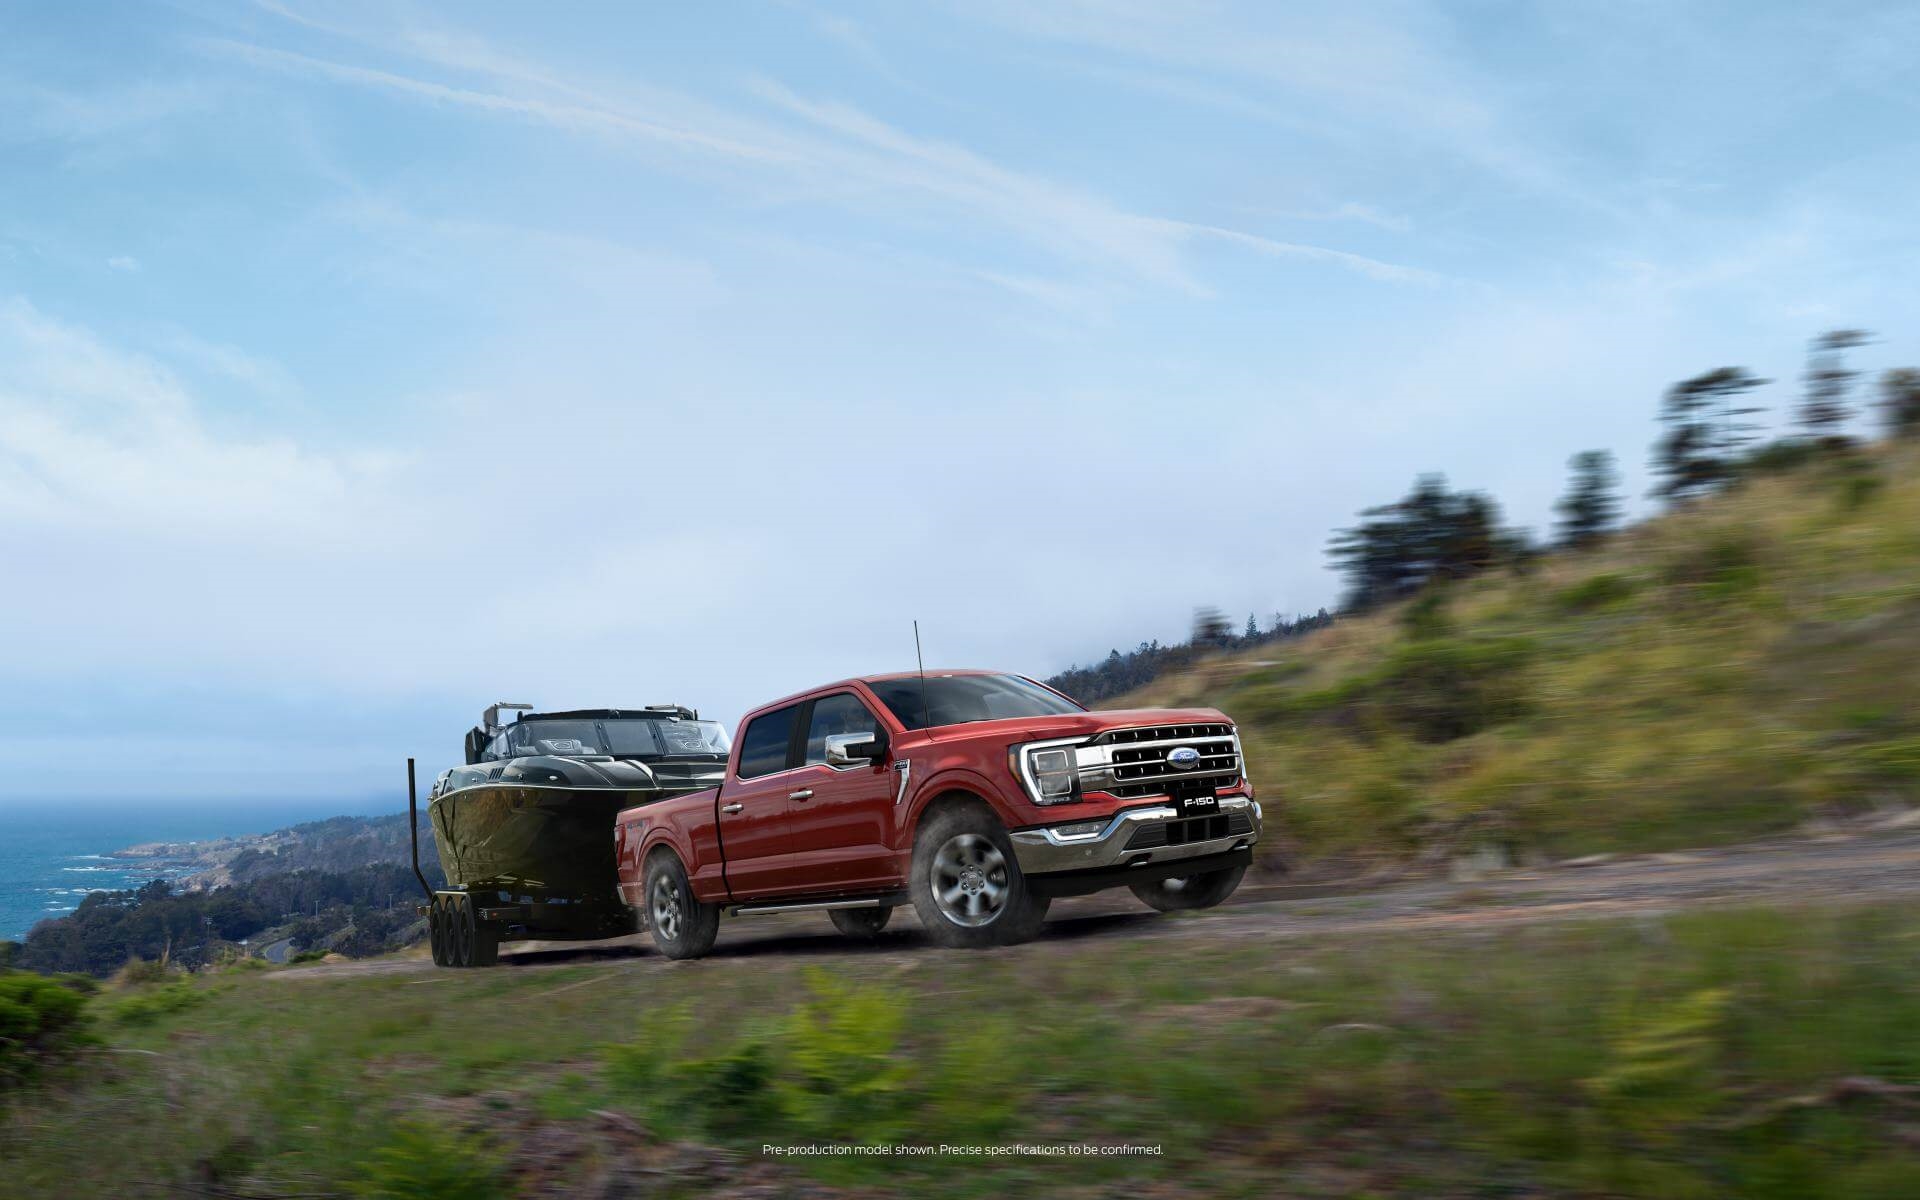 Ford F-150 towing a boat in the foothills of the Rocky Mountains